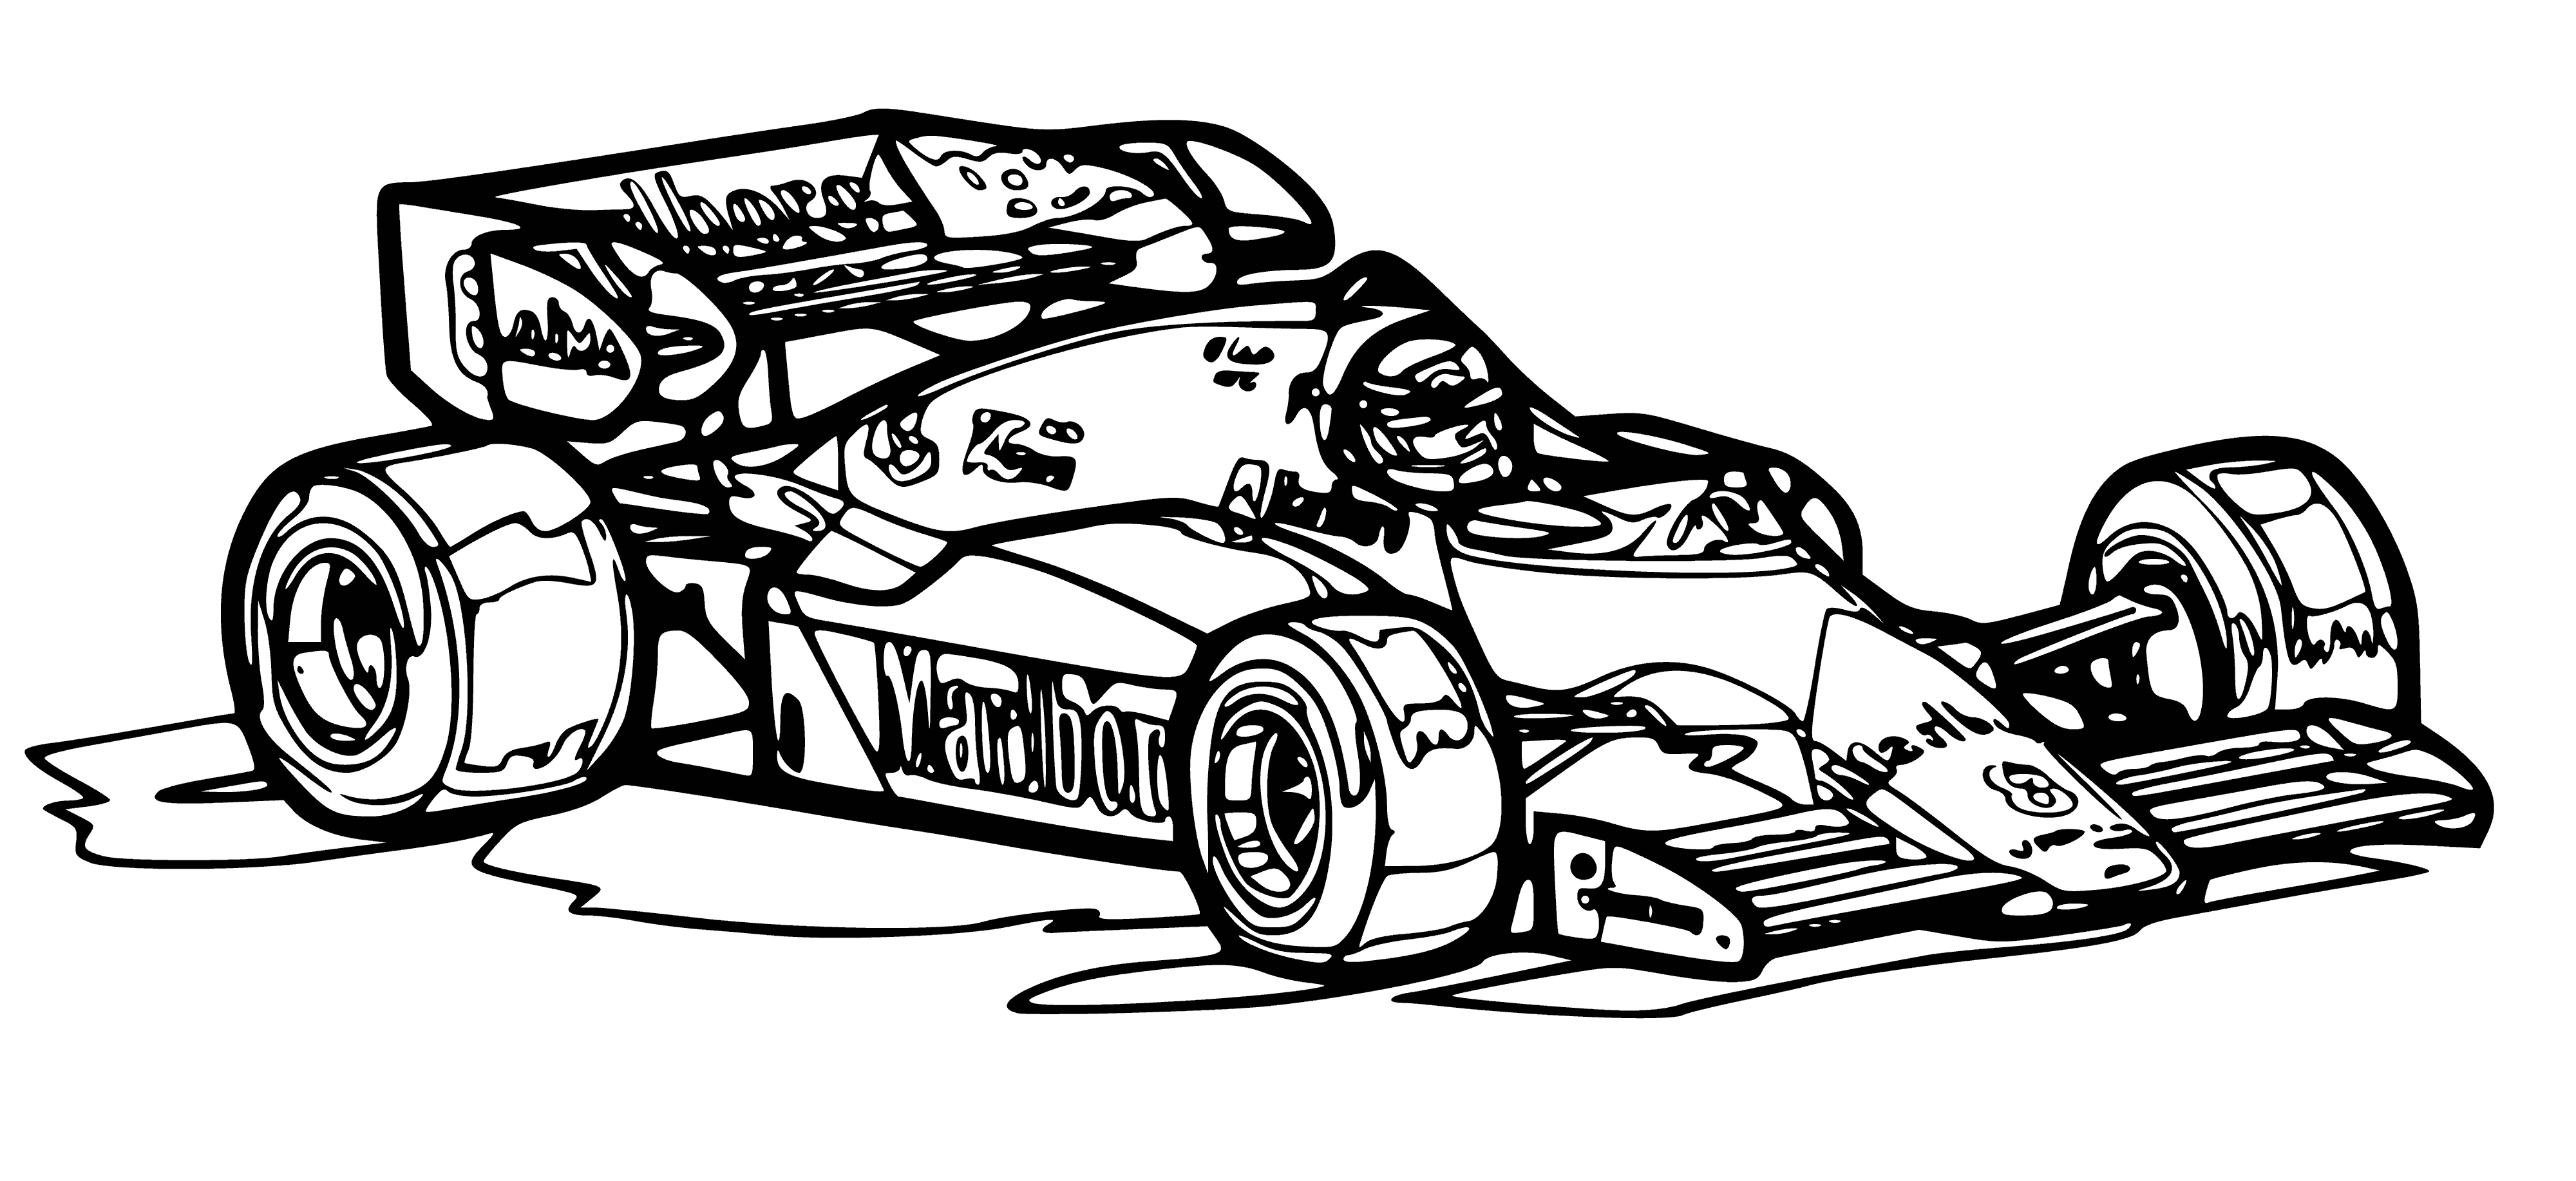 coloring page: Crowd gathered around track: 2 cars race around curve w/ big engines & sleek designs. Both cars have sponsors' logos.